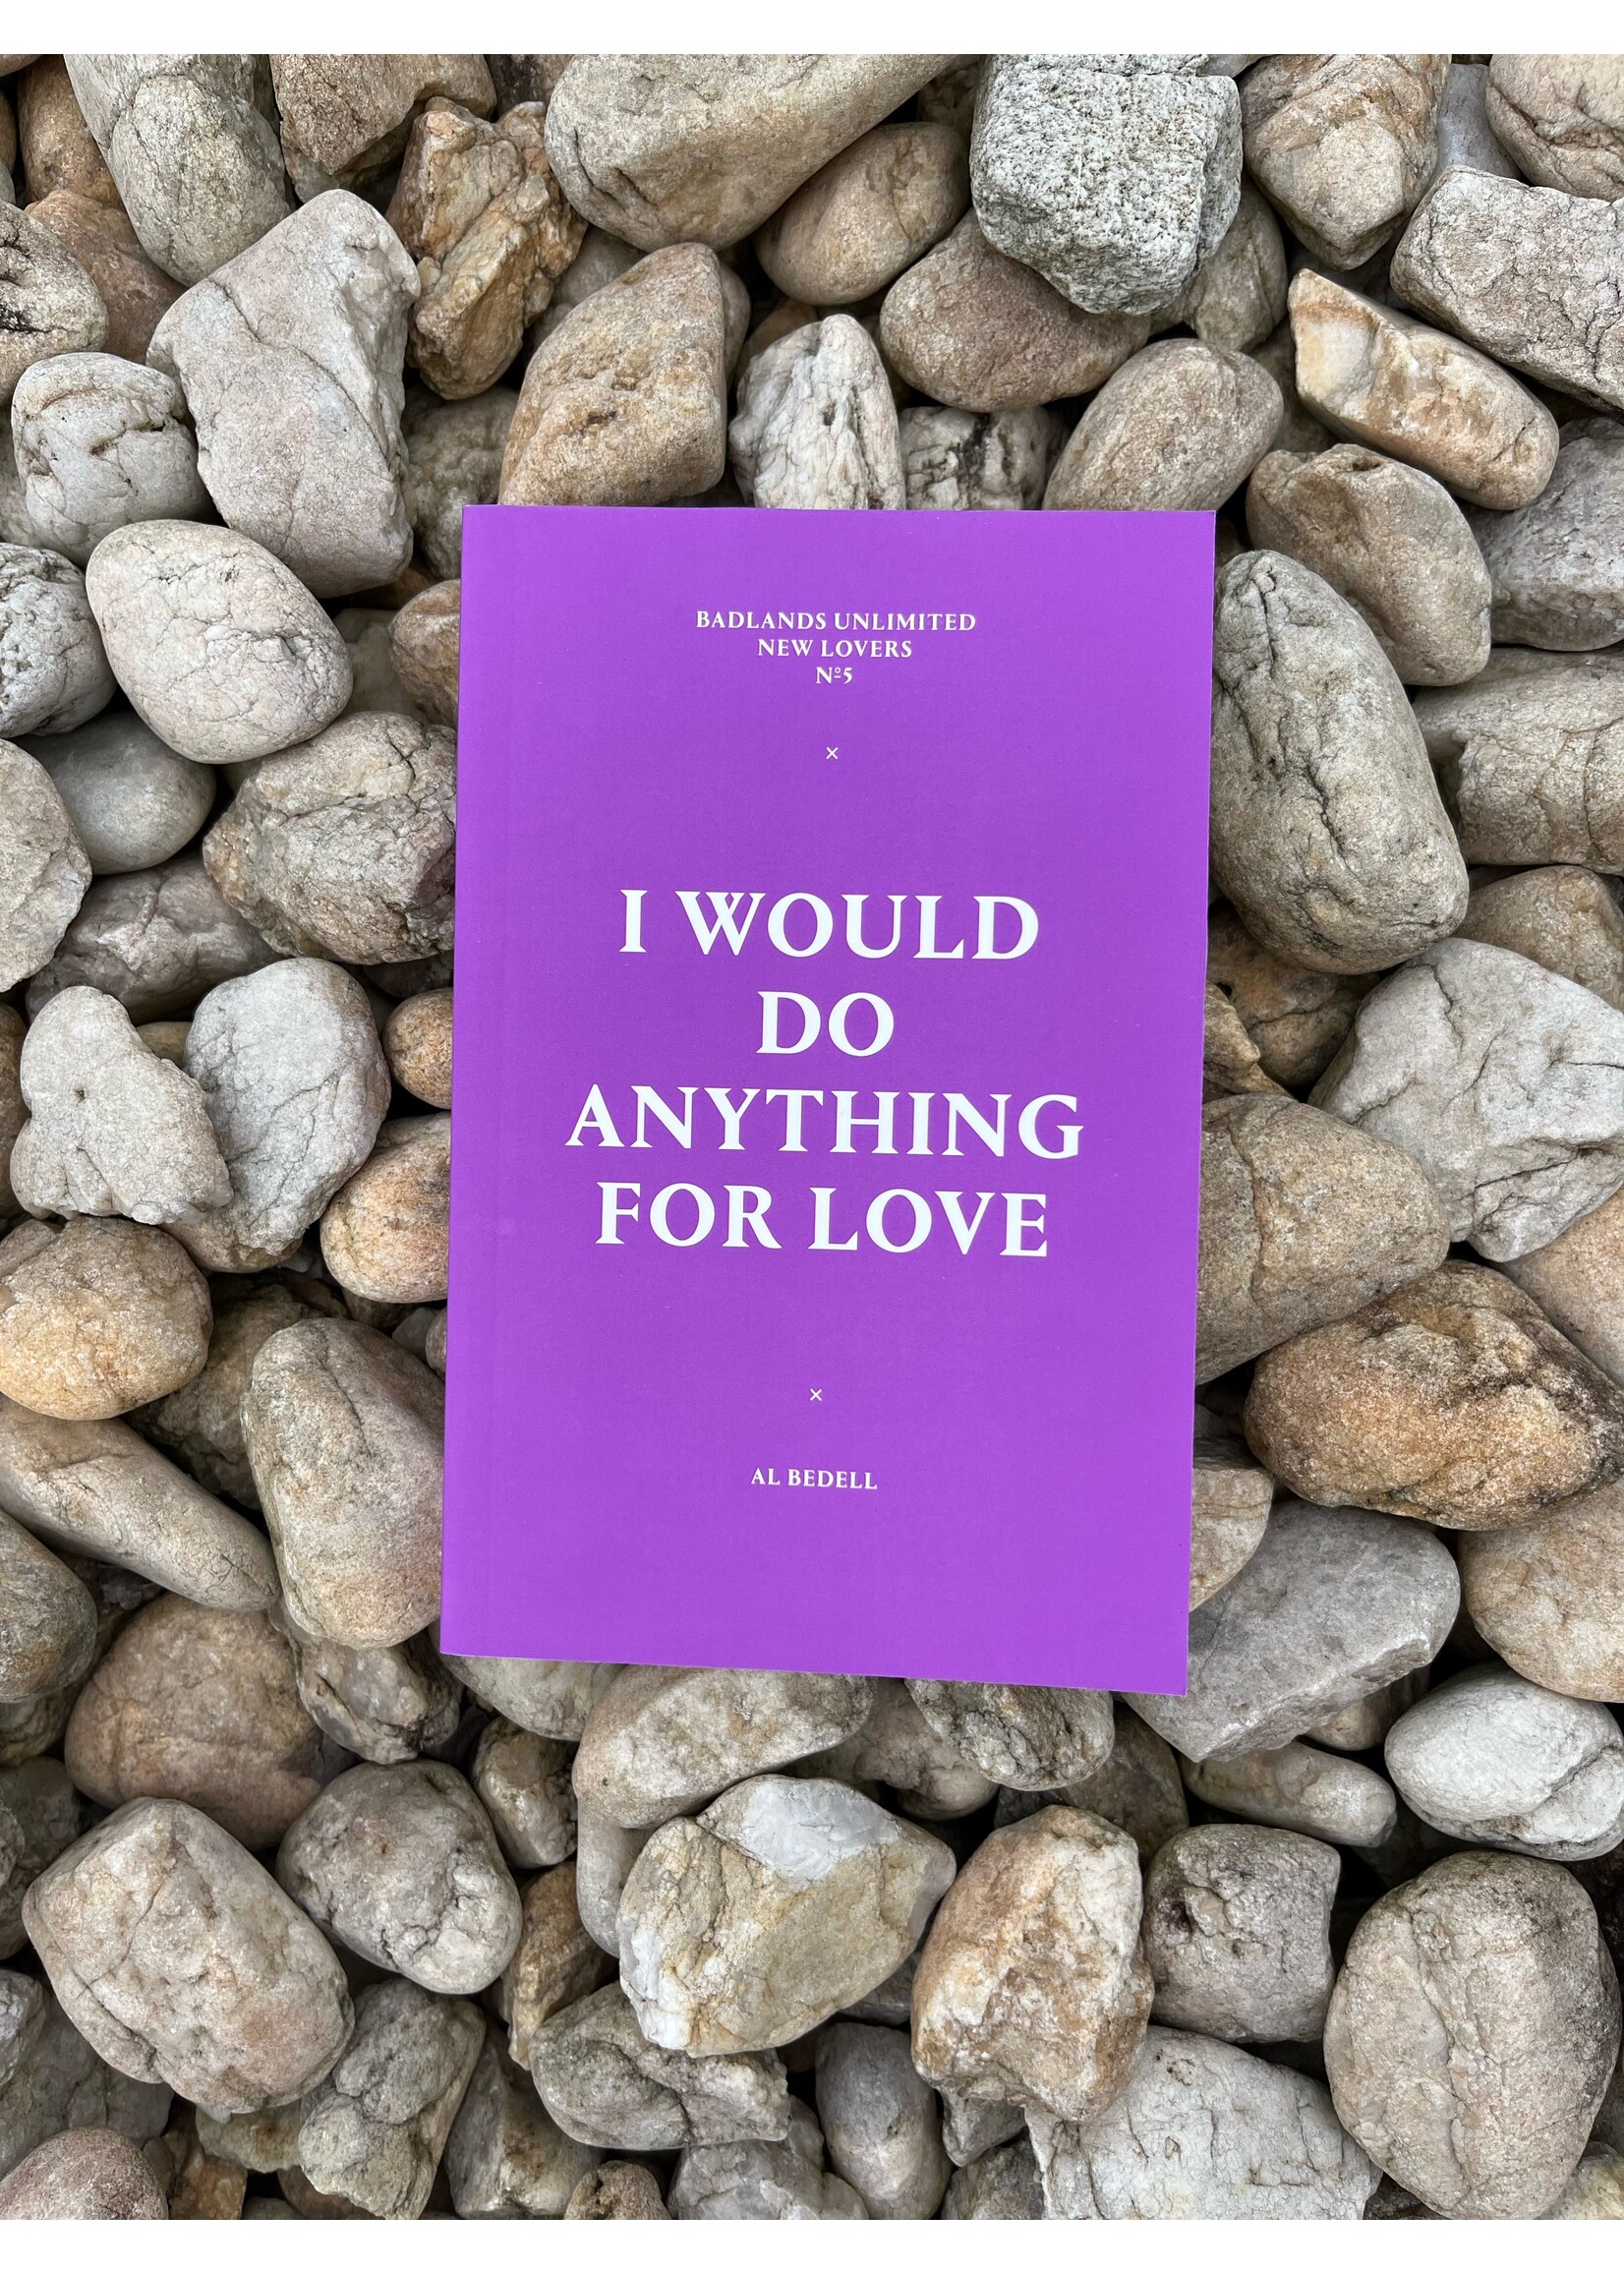 Badlands Unlimited New Lovers 5: I Would Do Anything for Love